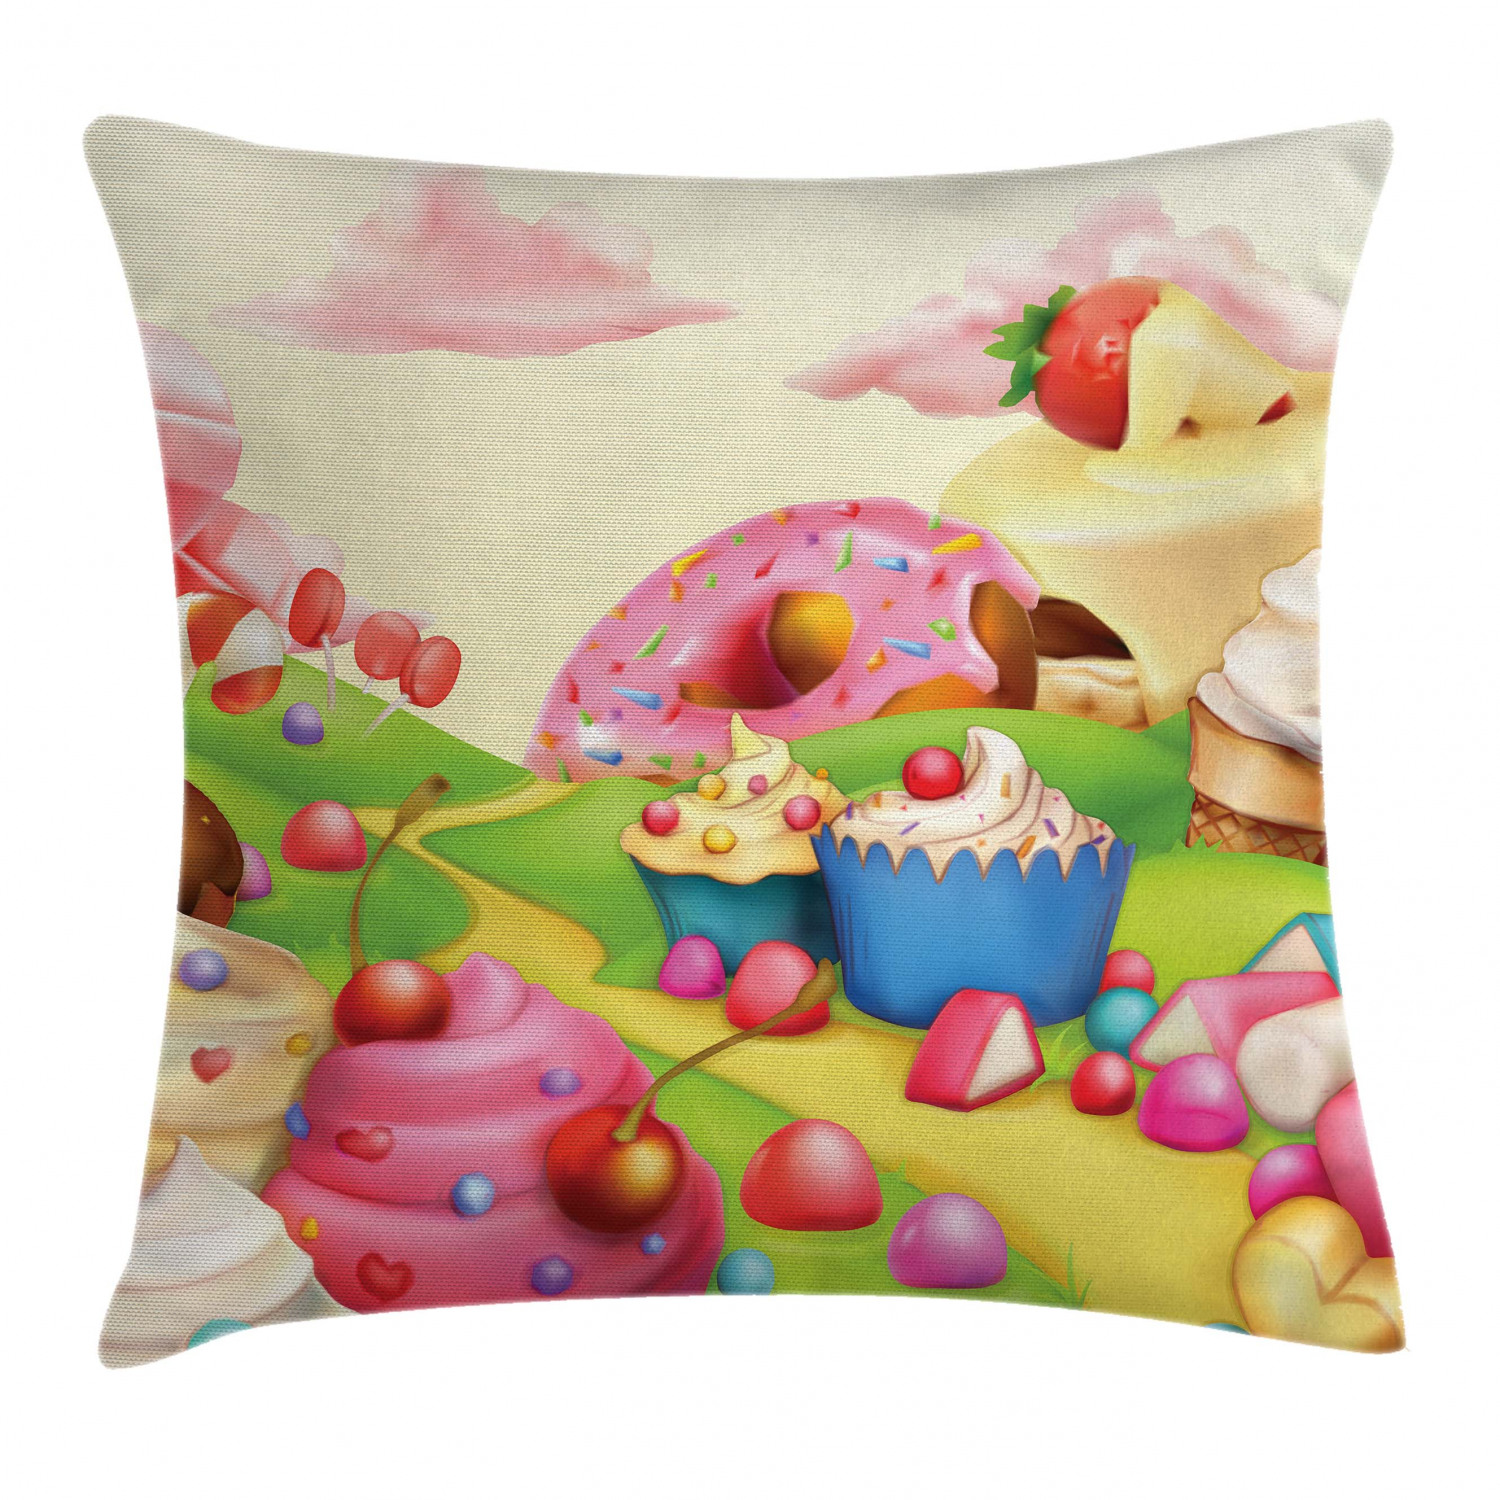 Modern Throw Pillow Cushion Cover, Yummy Donuts Sweet Land Cupcakes Ice Cream Cotton Candy Clouds Kids Nursery Design, Decorative Square Accent Pillow Case, 24 X 24 Inches, Multicolor, by Ambesonne - image 1 of 2